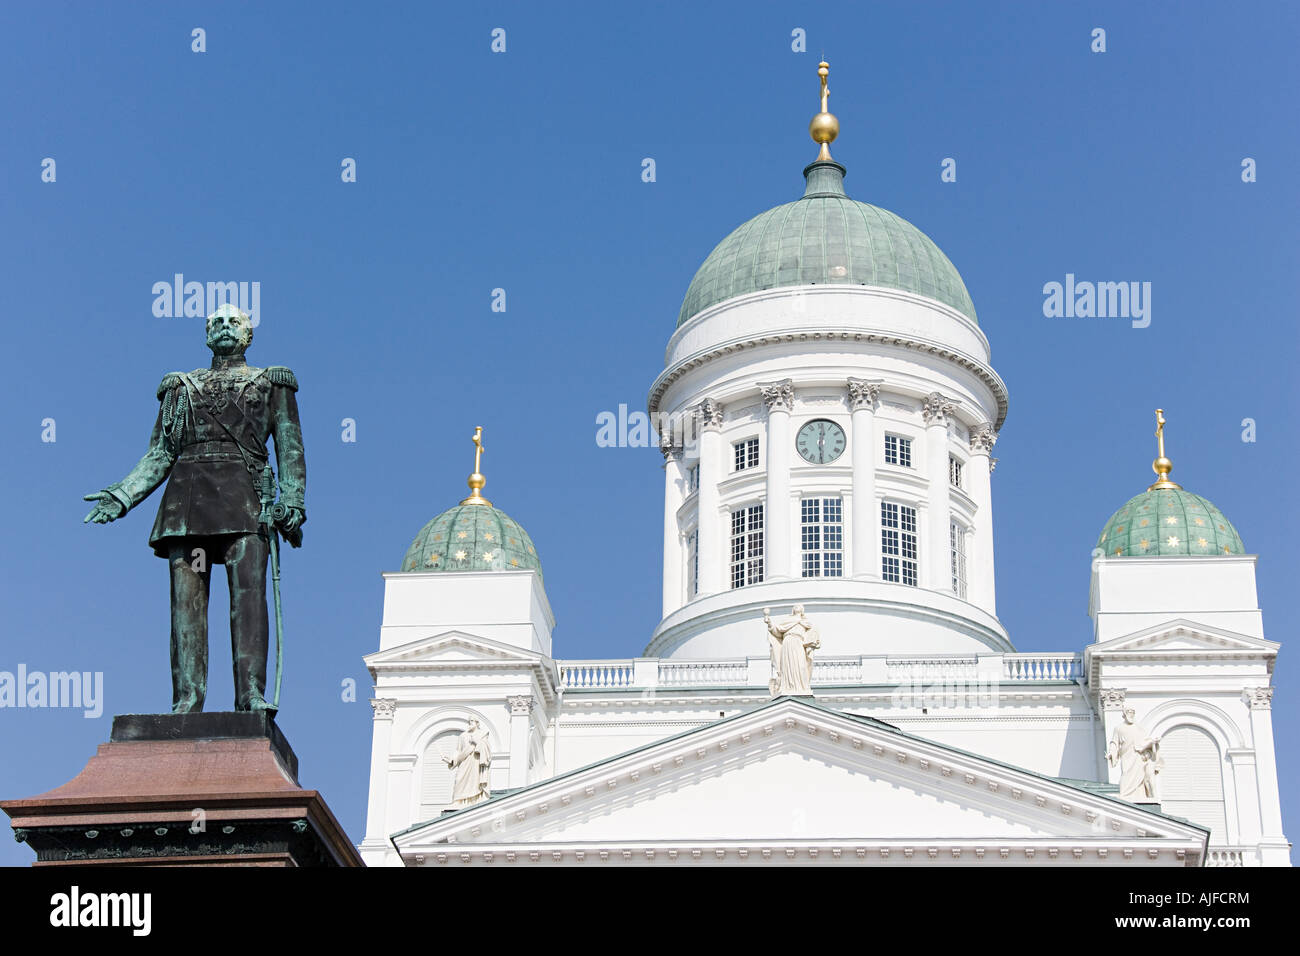 Helsinki cathedral and czar alexander ii statue Stock Photo